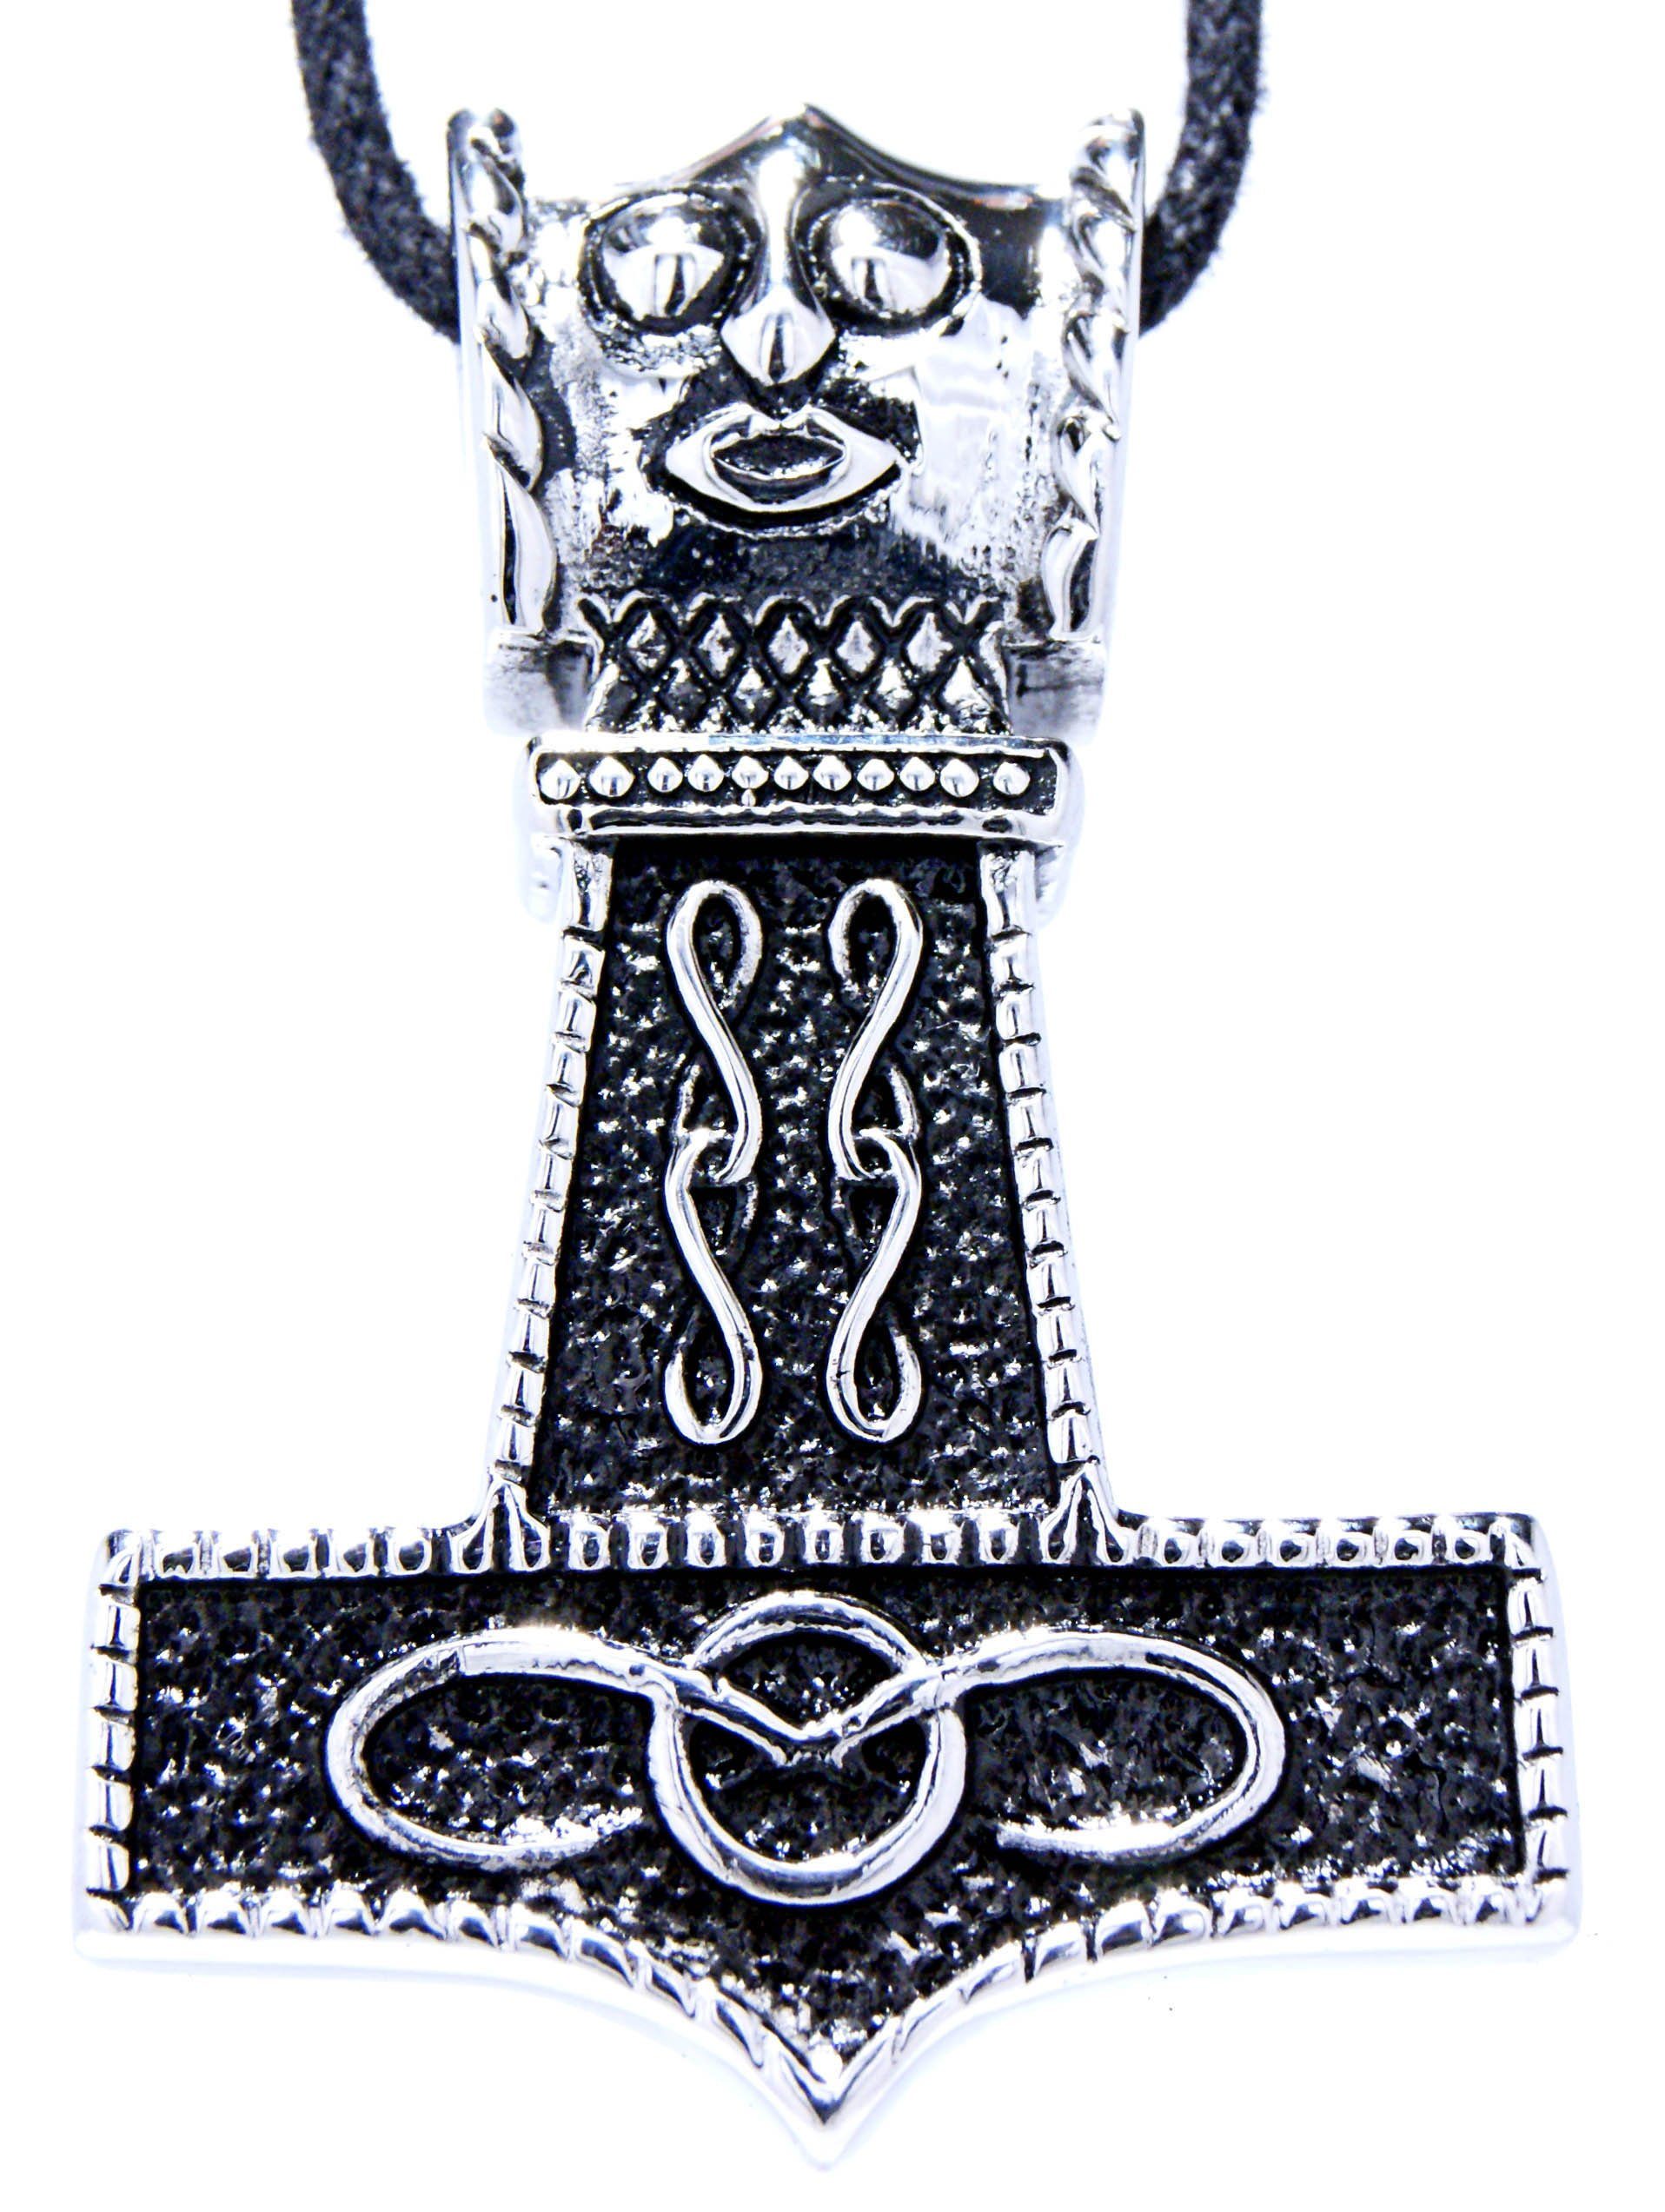 Kiss Anhänger of Edelstahl Thor Leather Hammer Kettenanhänger Thorshammer Mjölnir Thorhammer